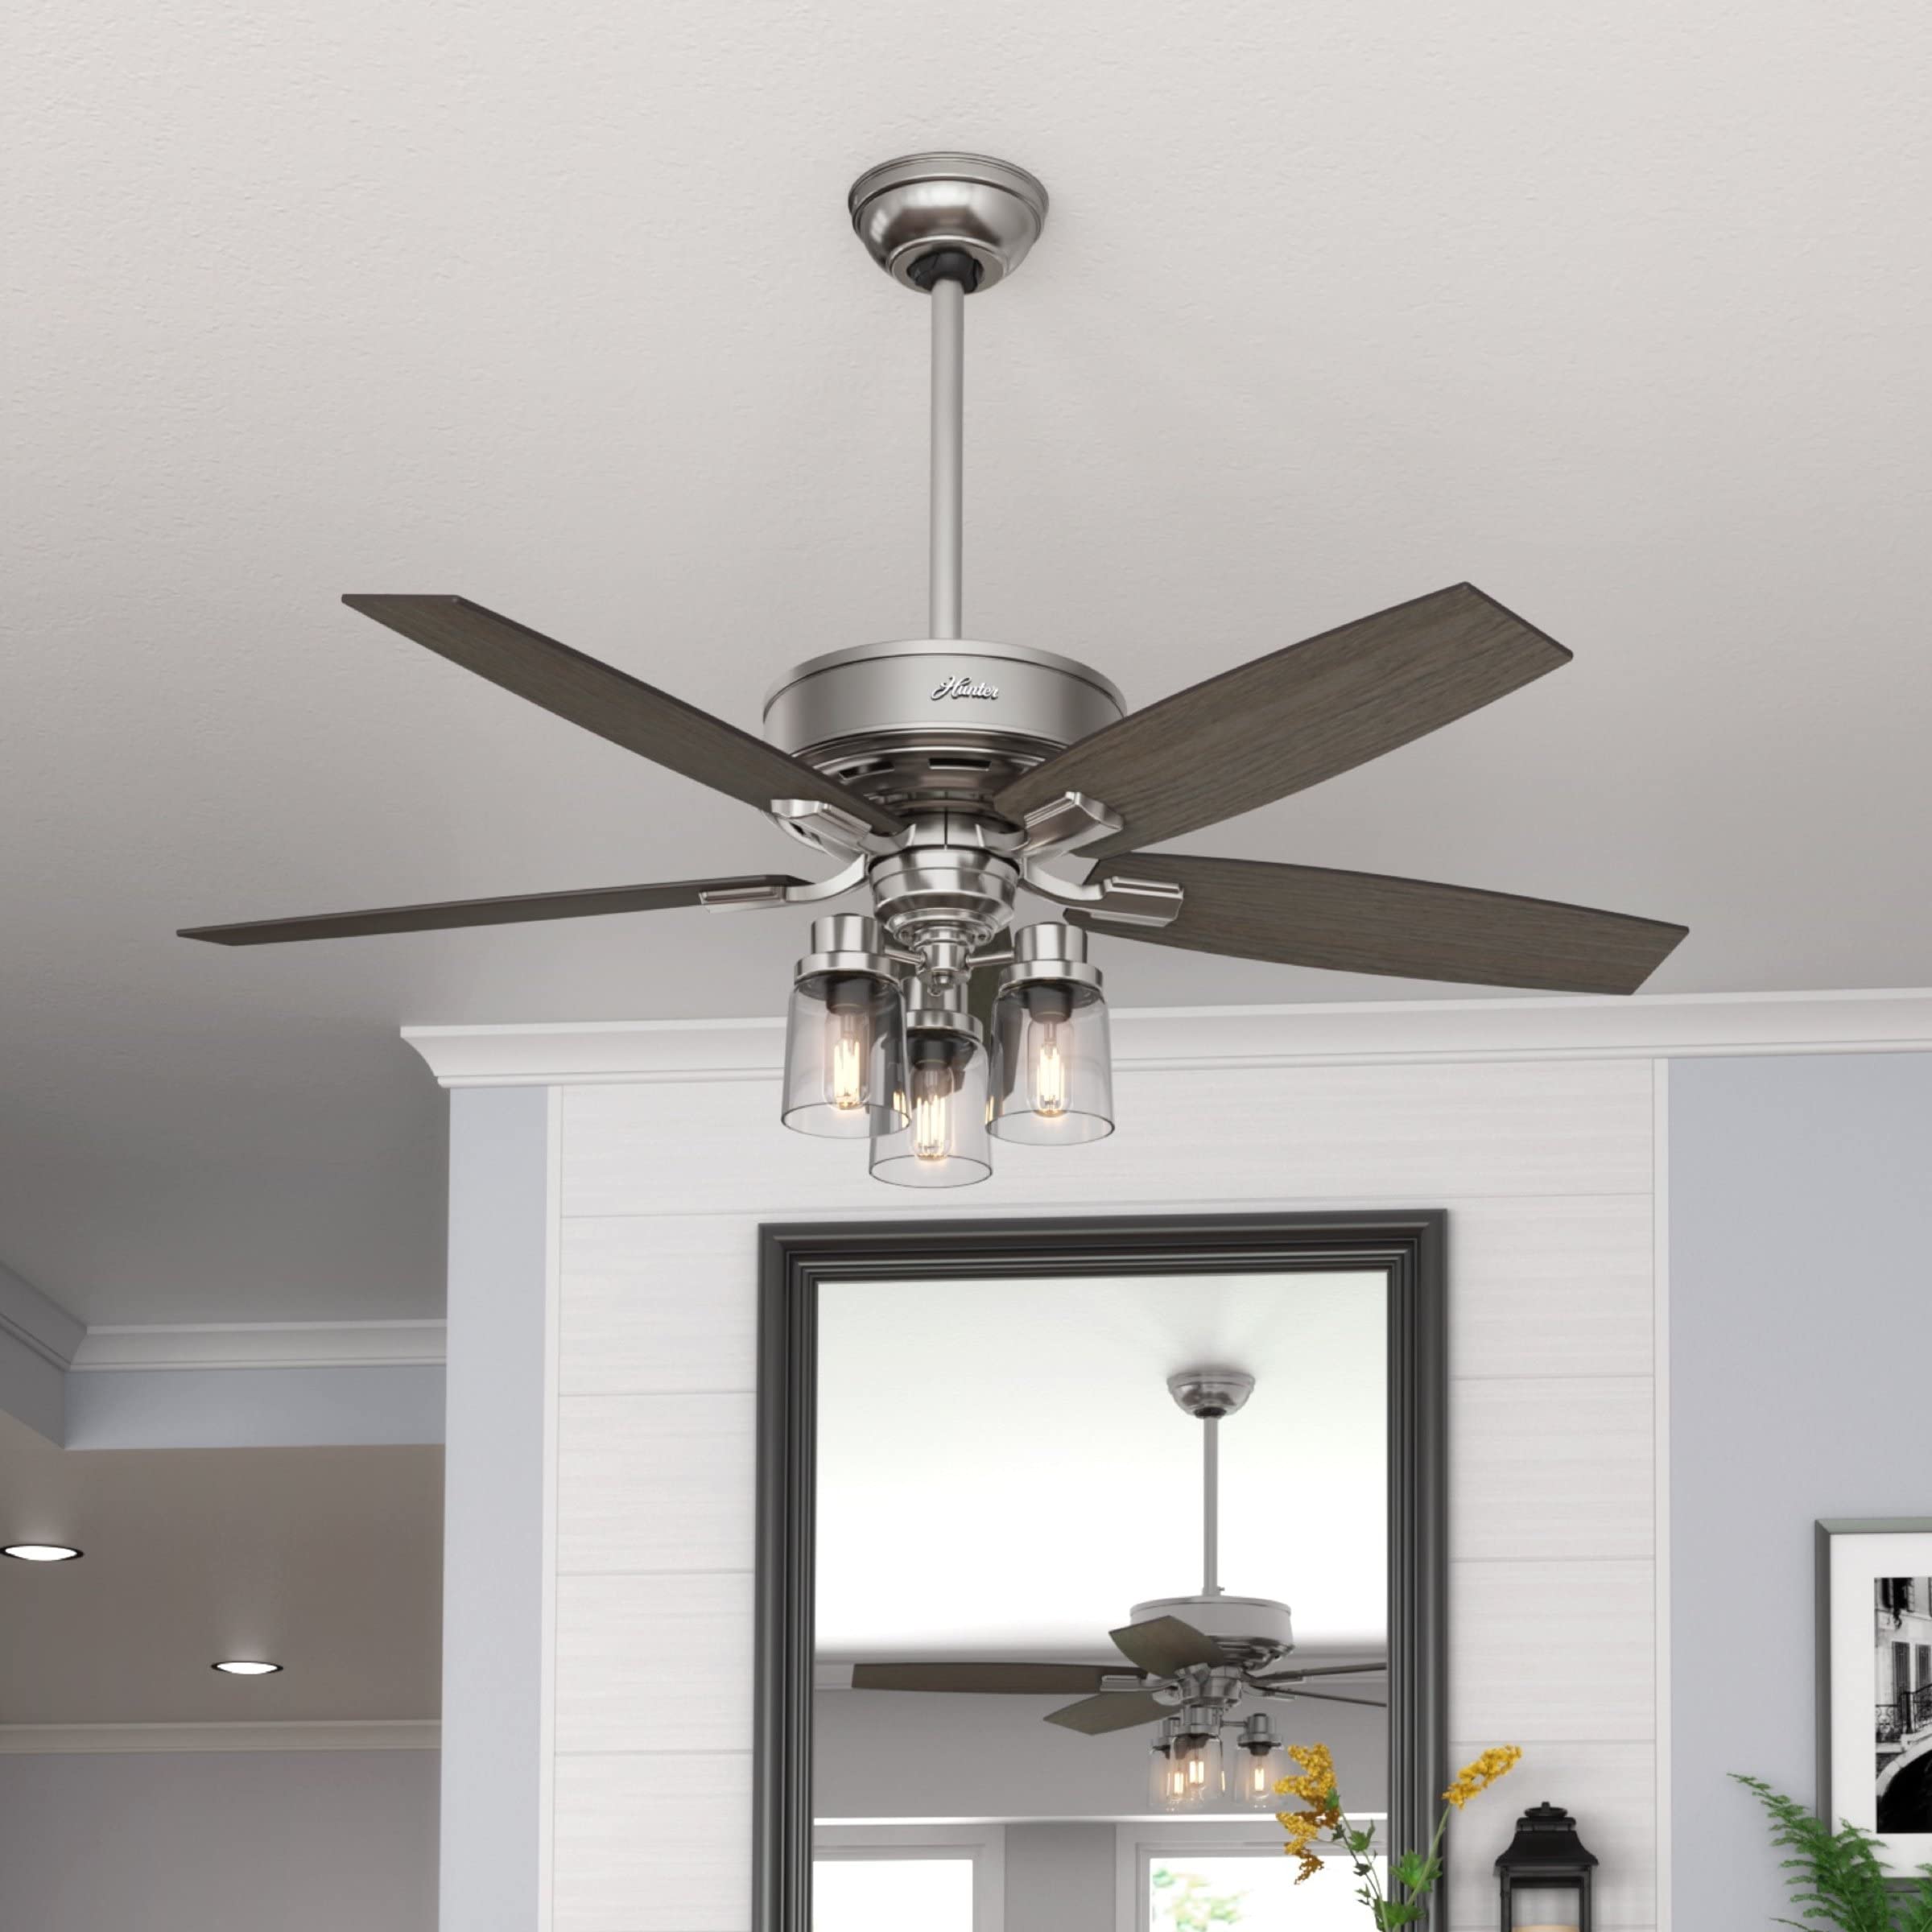 Hunter Fan Company, 54190, 52 inch Bennett Brushed Nickel Ceiling Fan with LED Light Kit and Handheld Remote